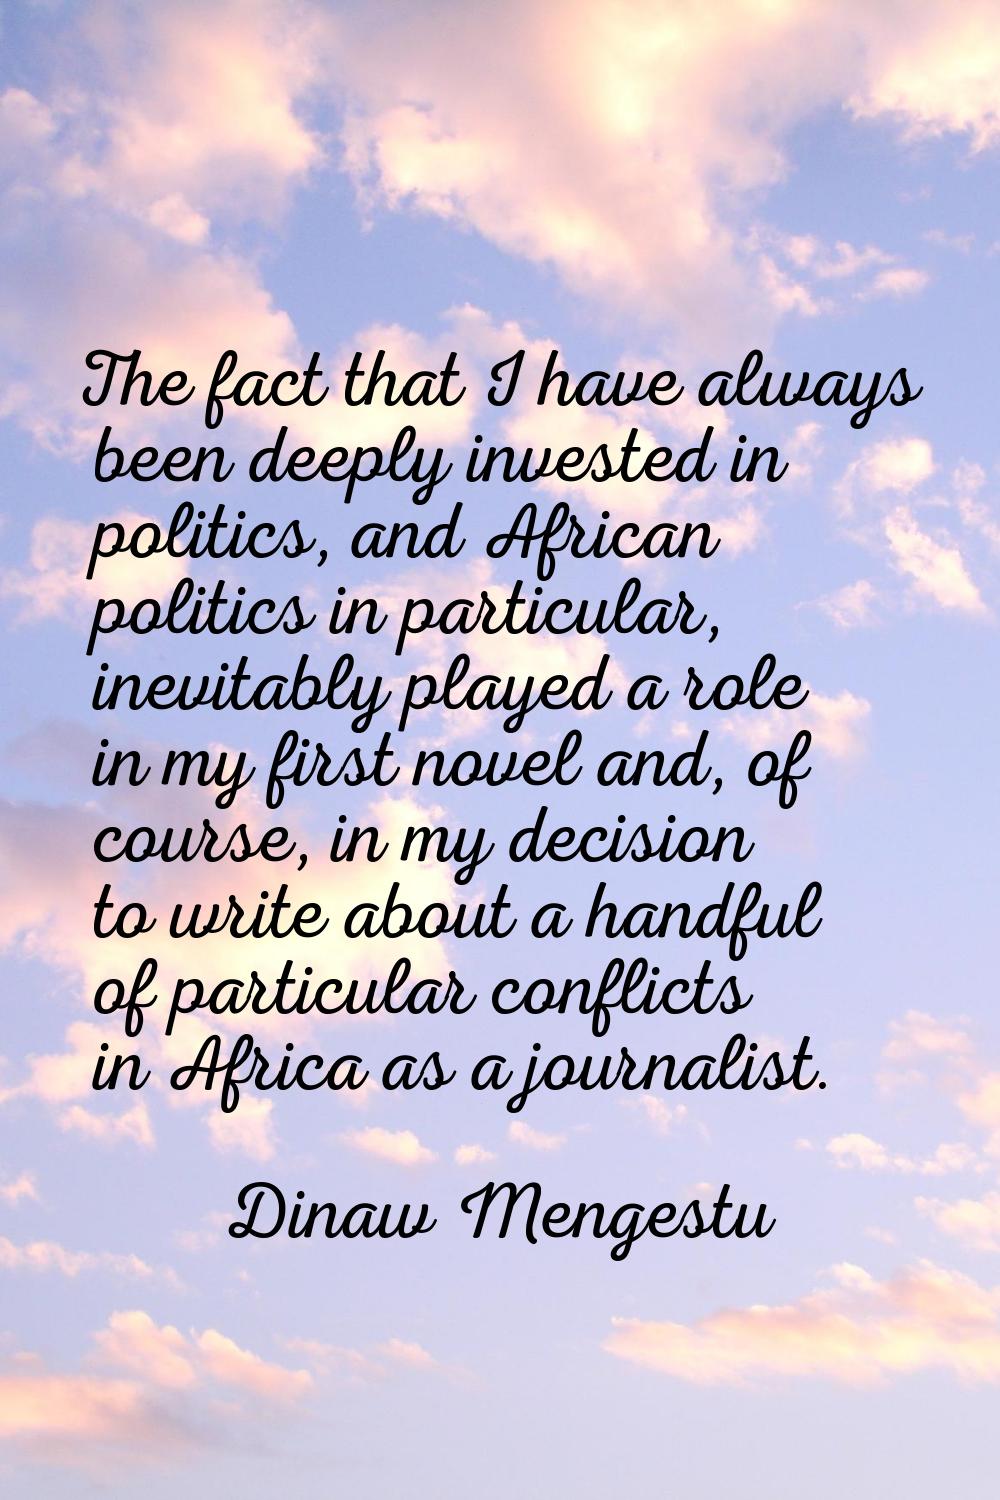 The fact that I have always been deeply invested in politics, and African politics in particular, i